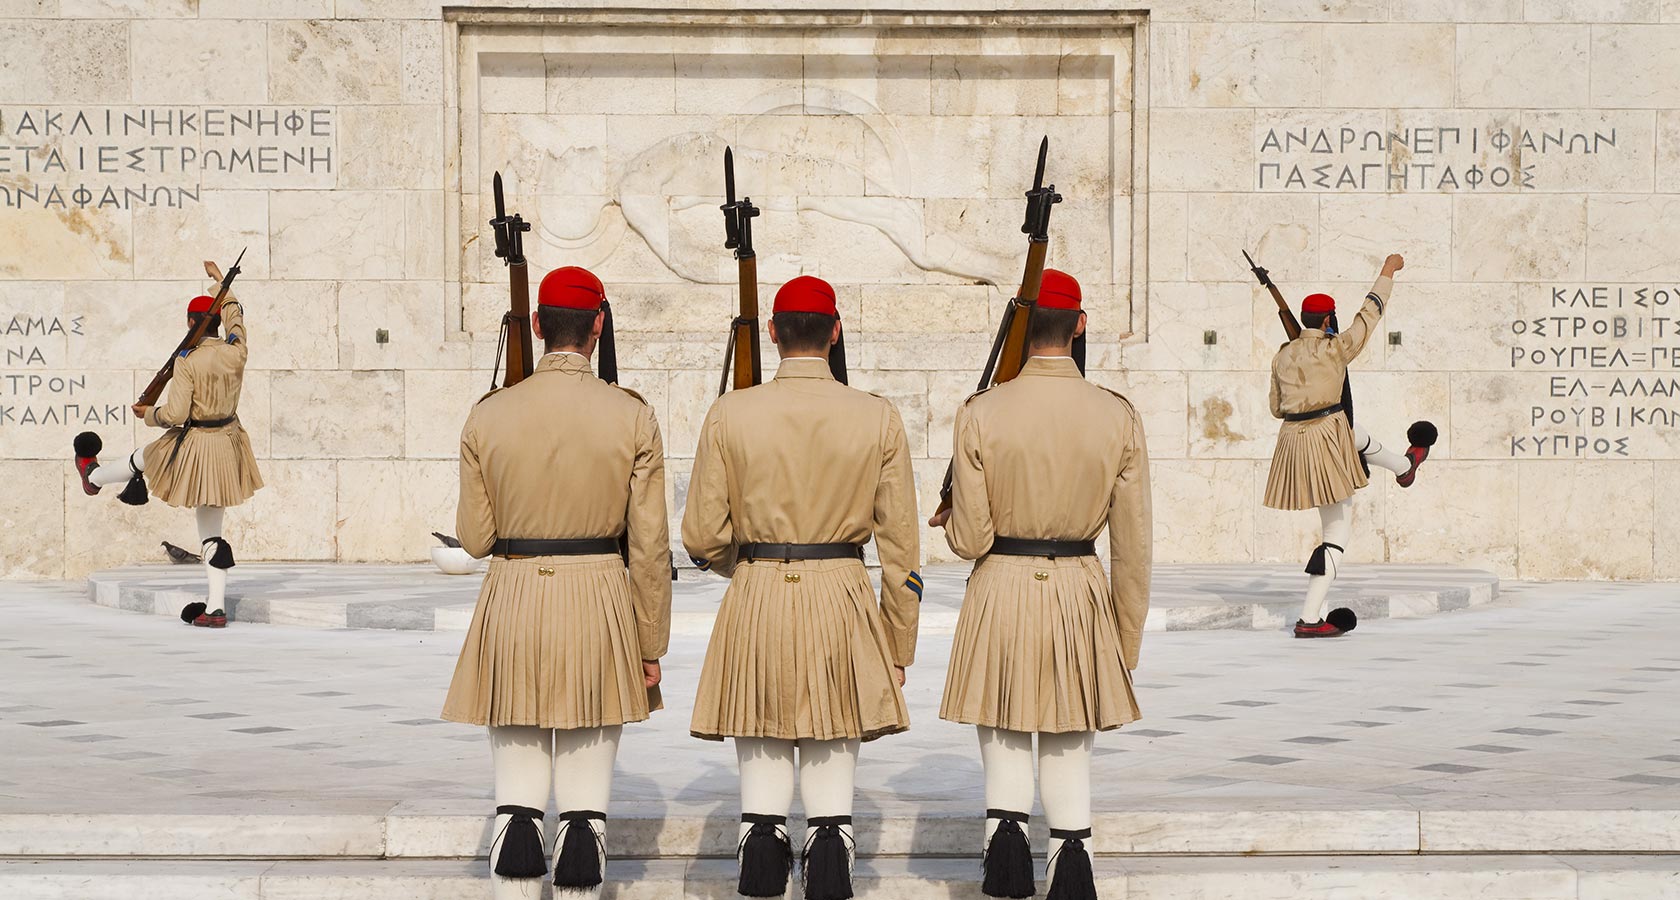 Ceremonial Changing Guards at Syntagma Athens Greece – Greek Parliament